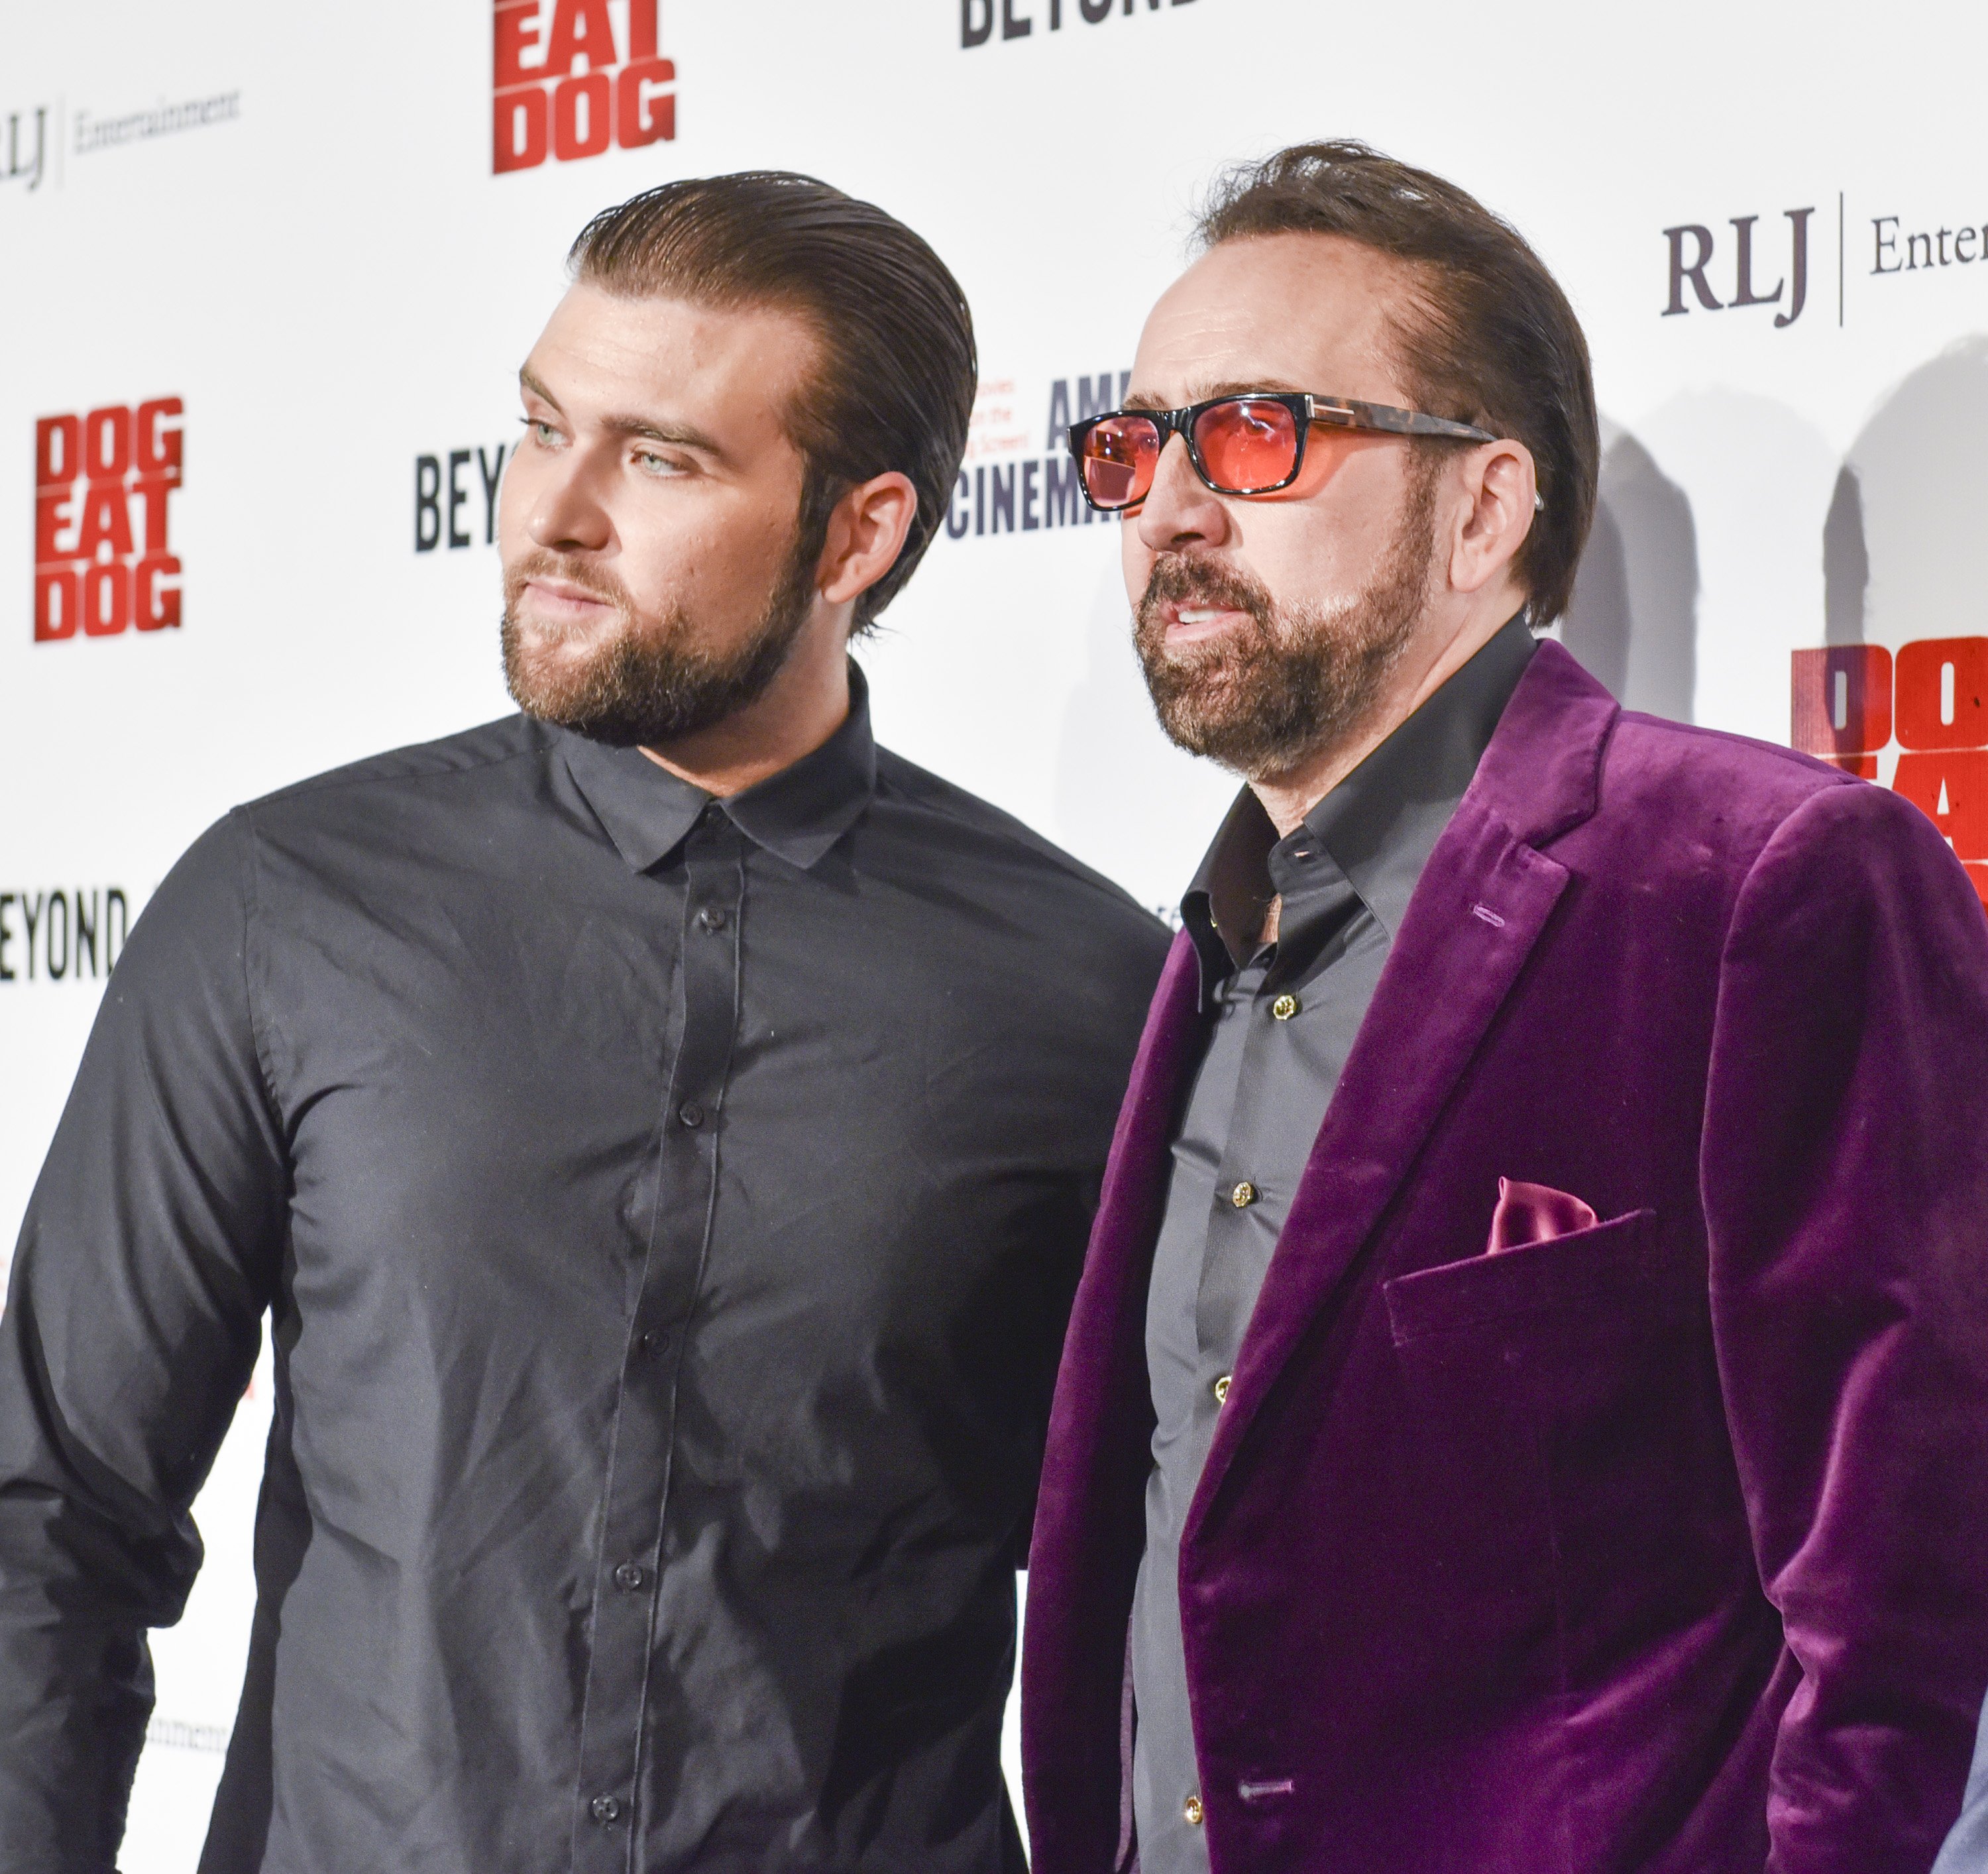 Actor Nicholas Cage (R) and son Weston Cage attend the premiere of "Dog Eat Dog" at The Egyptian Theatre on September 30, 2016 in Los Angeles, California. | Source: Getty Images